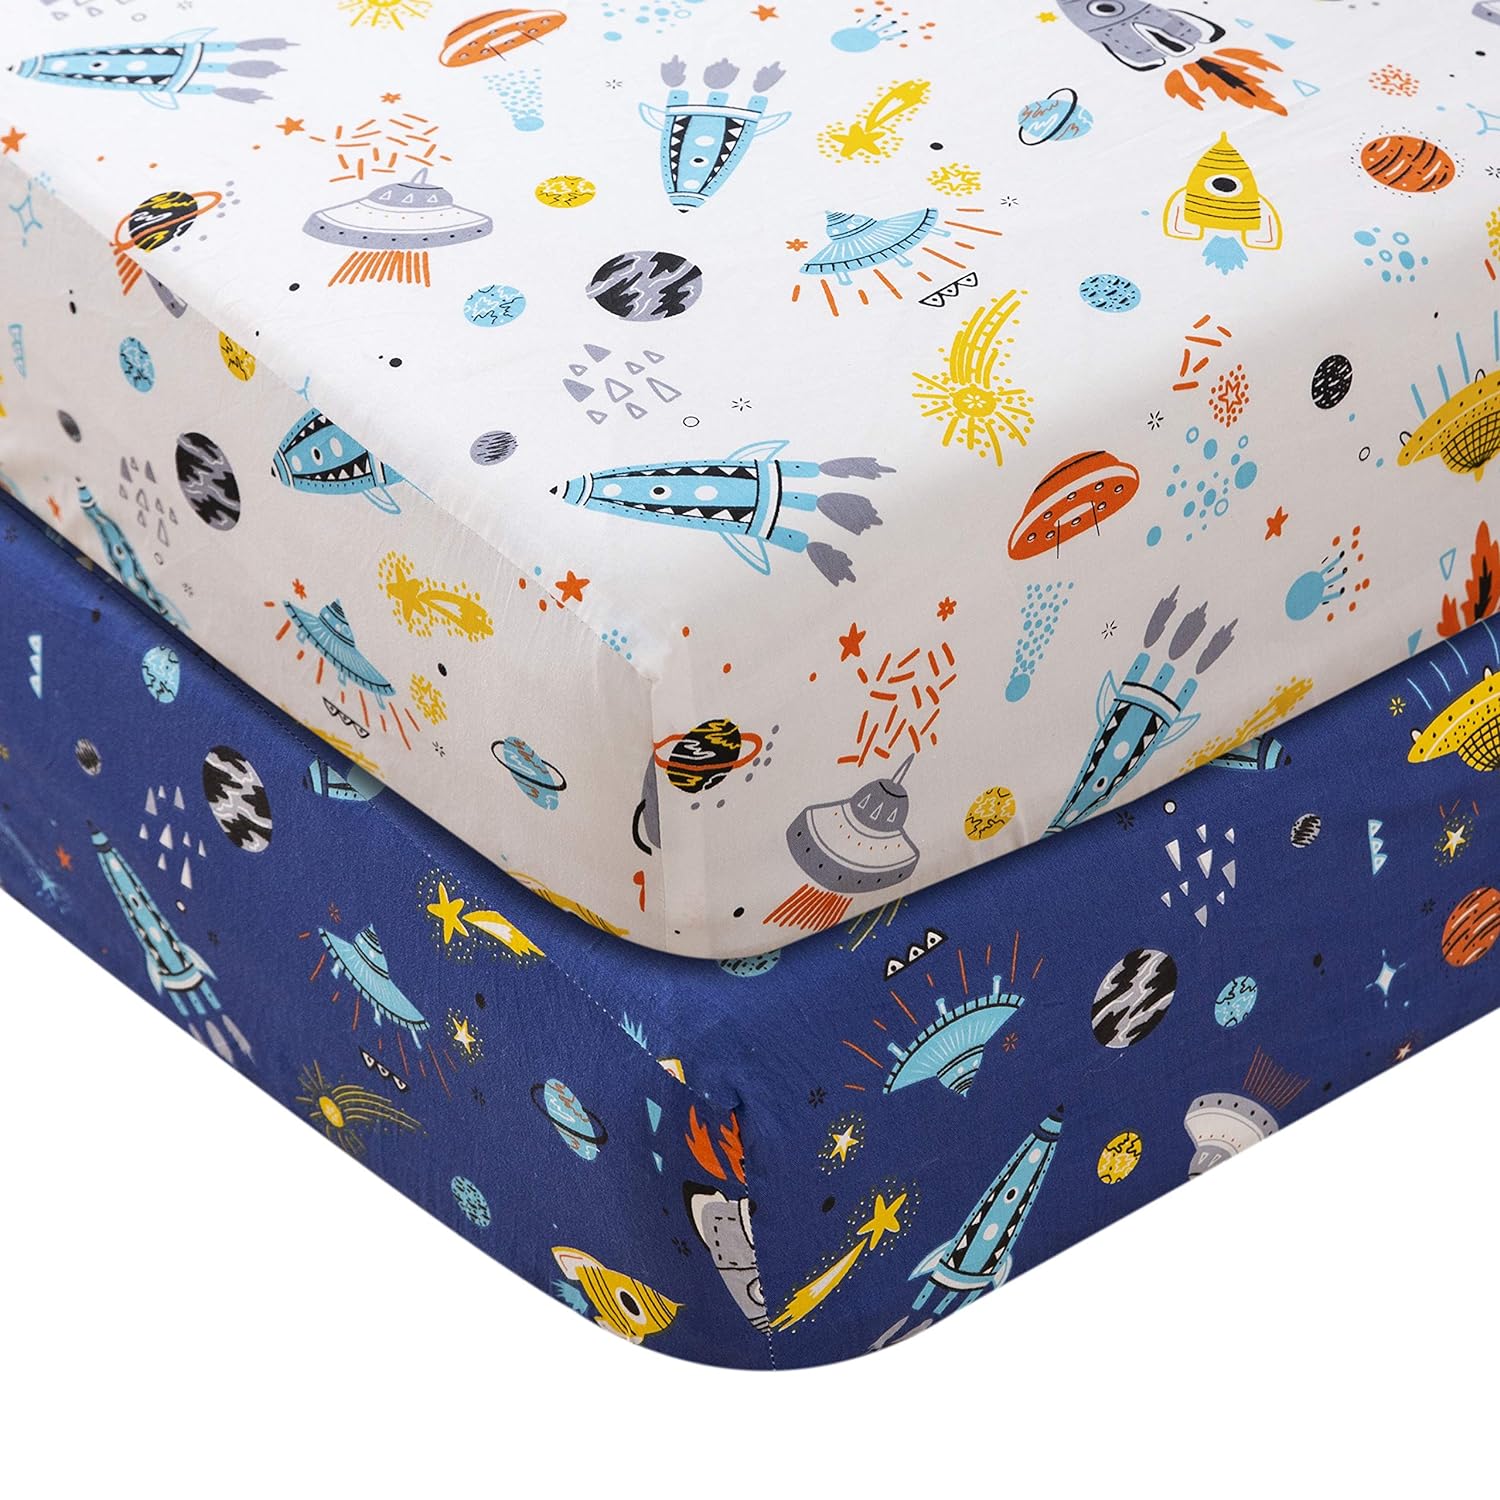 Great Choice Products Baby Boys Crib Sheet Sets Outer Space, Rocket & Planet Fitted Crib Sheets,2 Pack Navy/White Baby Infant Newborn Crib Mattress…